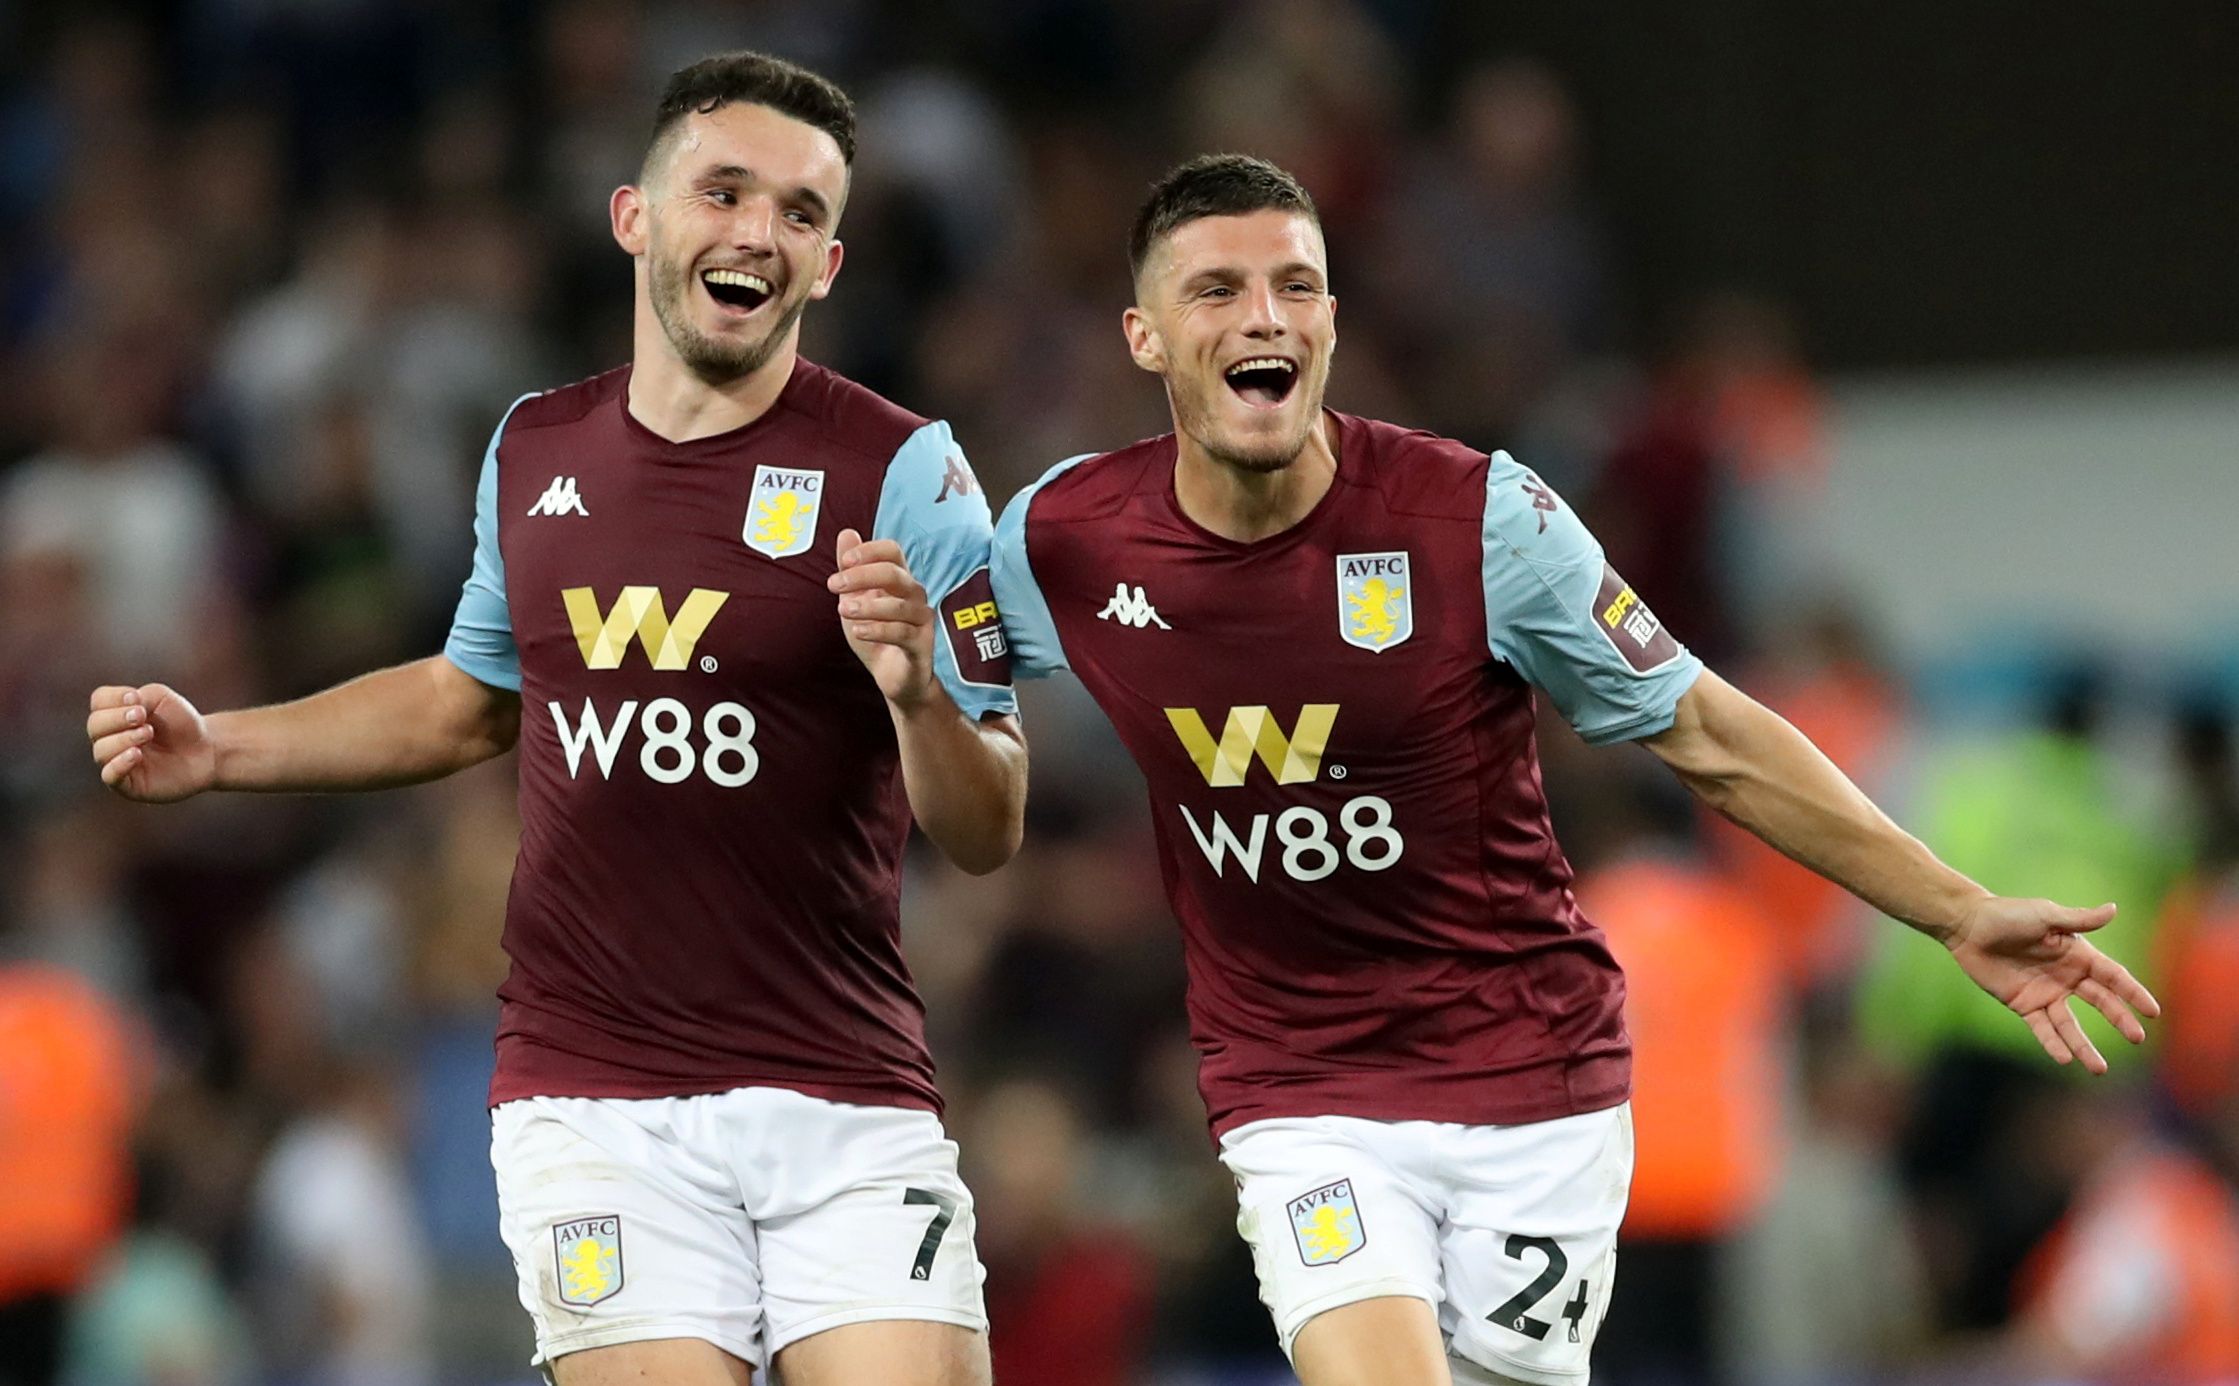 Soccer Football - Premier League - Aston Villa v Everton - Villa Park, Birmingham, Britain - August 23, 2019  Aston Villa's John McGinn and Frederic Guilbert celebrate their second goal   Action Images via Reuters/Carl Recine  EDITORIAL USE ONLY. No use with unauthorized audio, video, data, fixture lists, club/league logos or 